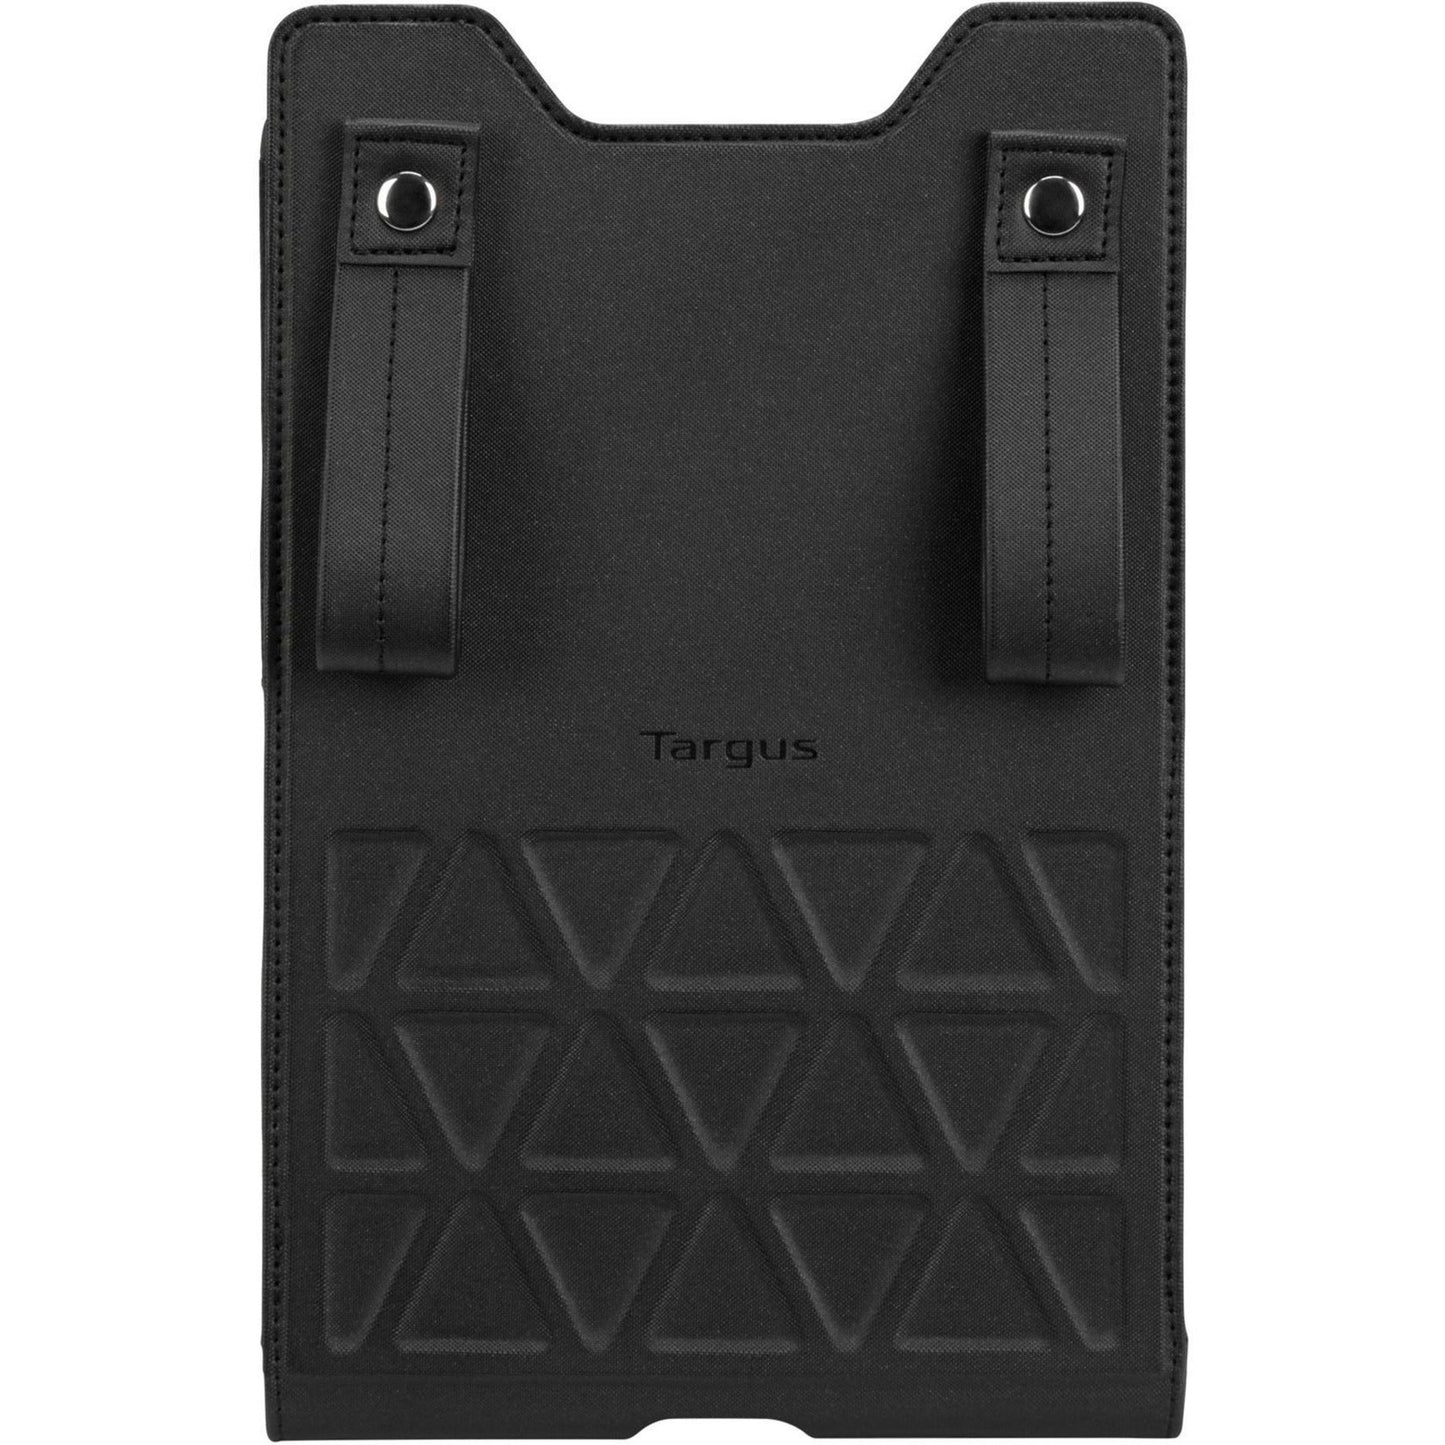 Targus Field-Ready THZ711GLZ Carrying Case (Holster) for 7" to 8" Tablet - Black